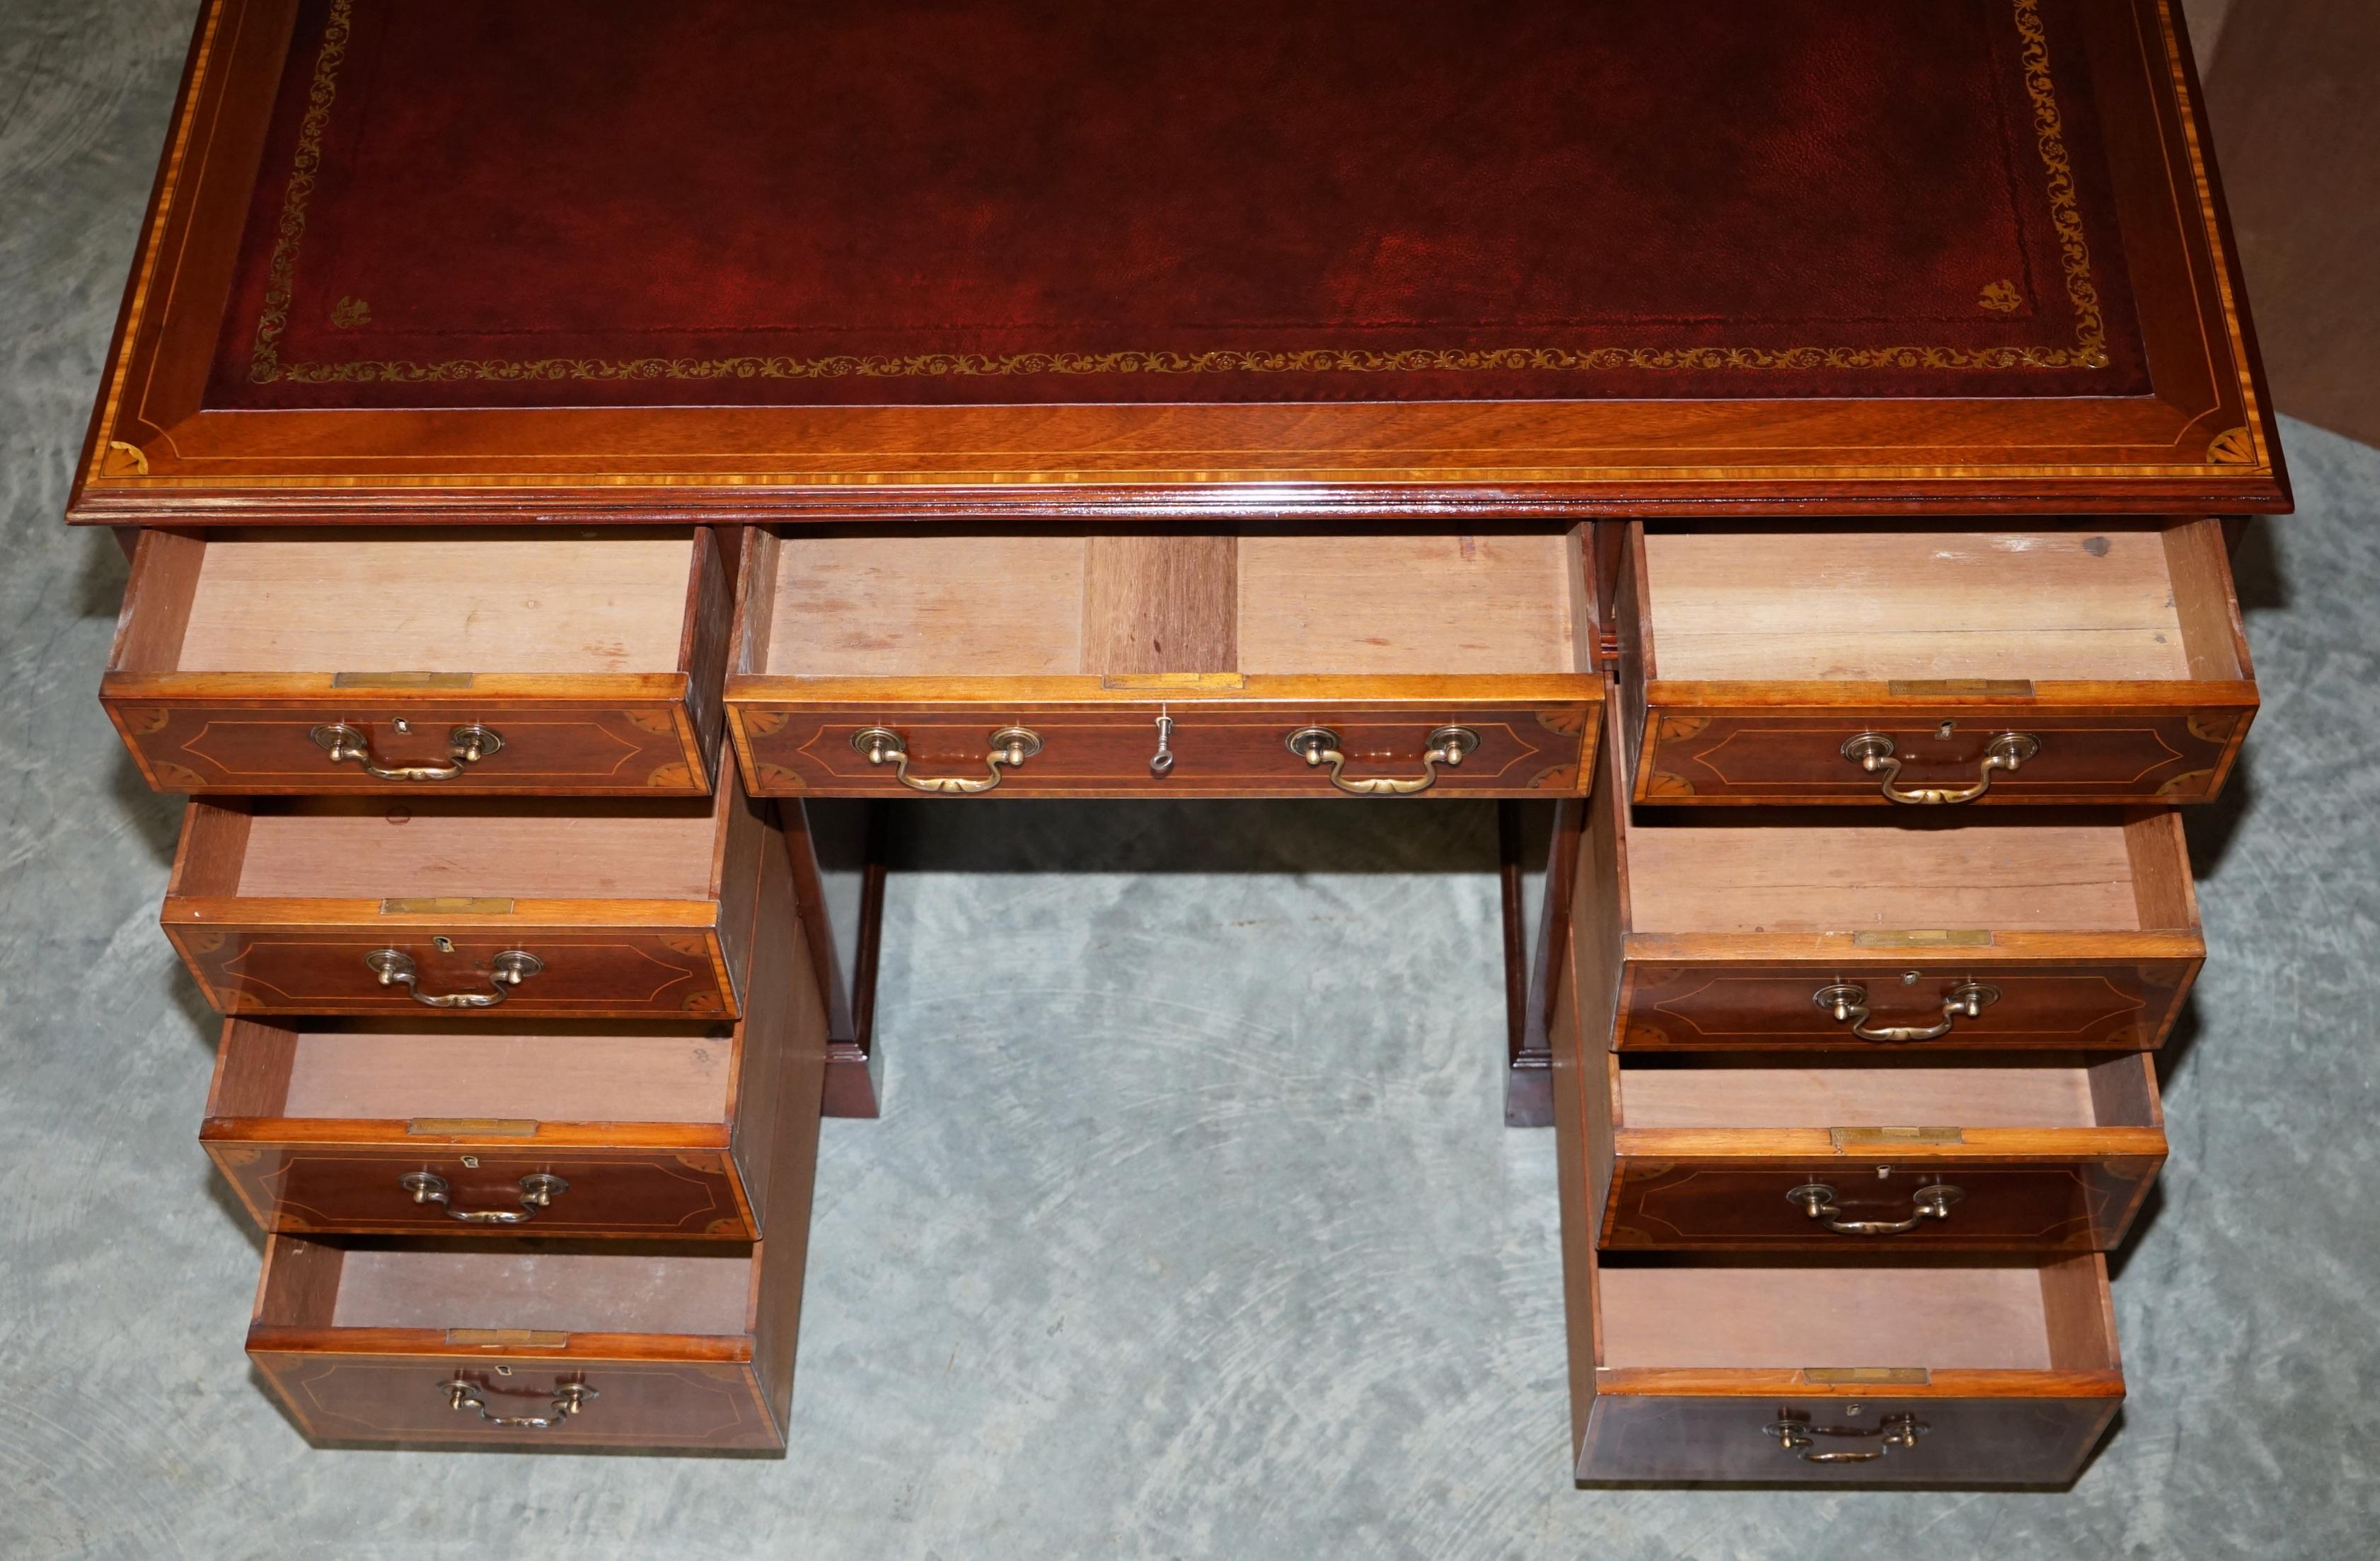 Stunning Antique Victorian Fully Restored Sheraton Revival Desk Oxblood Leather For Sale 14